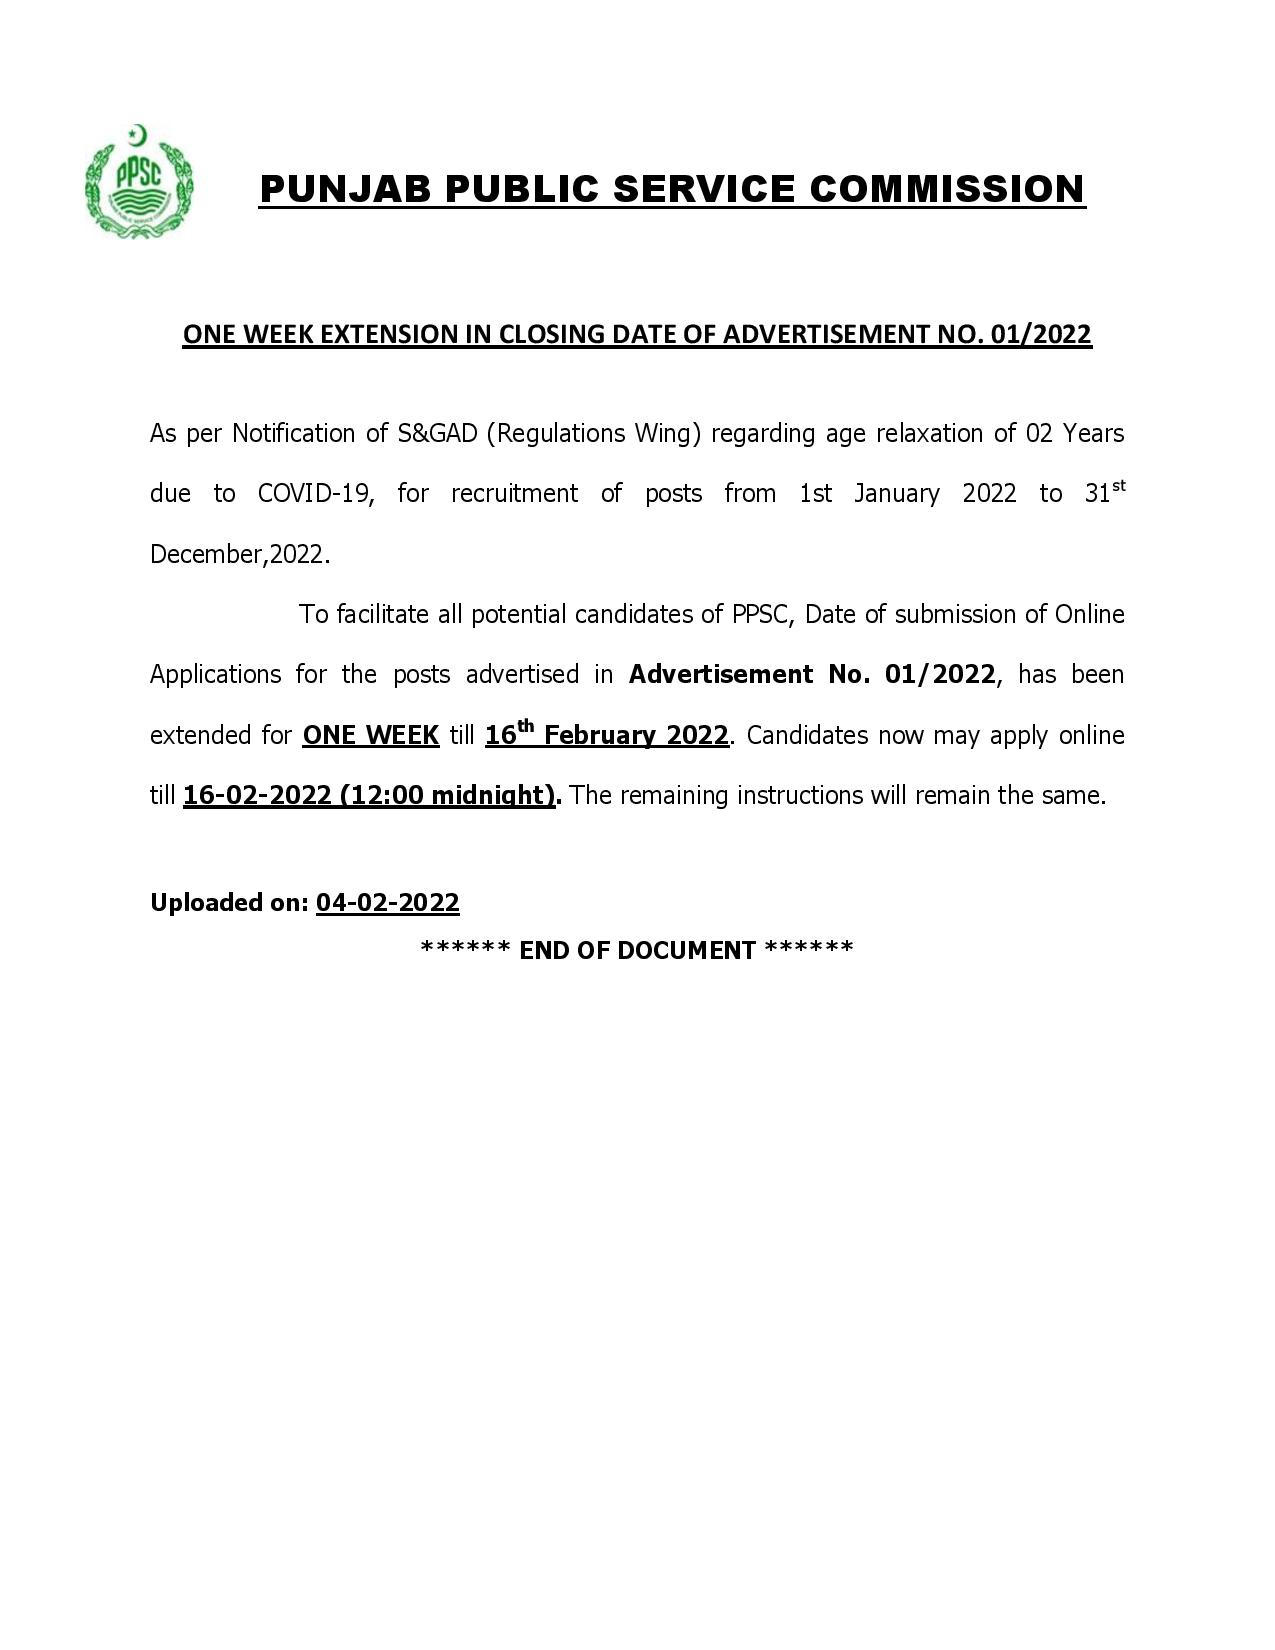 PPSC extends date for online applications